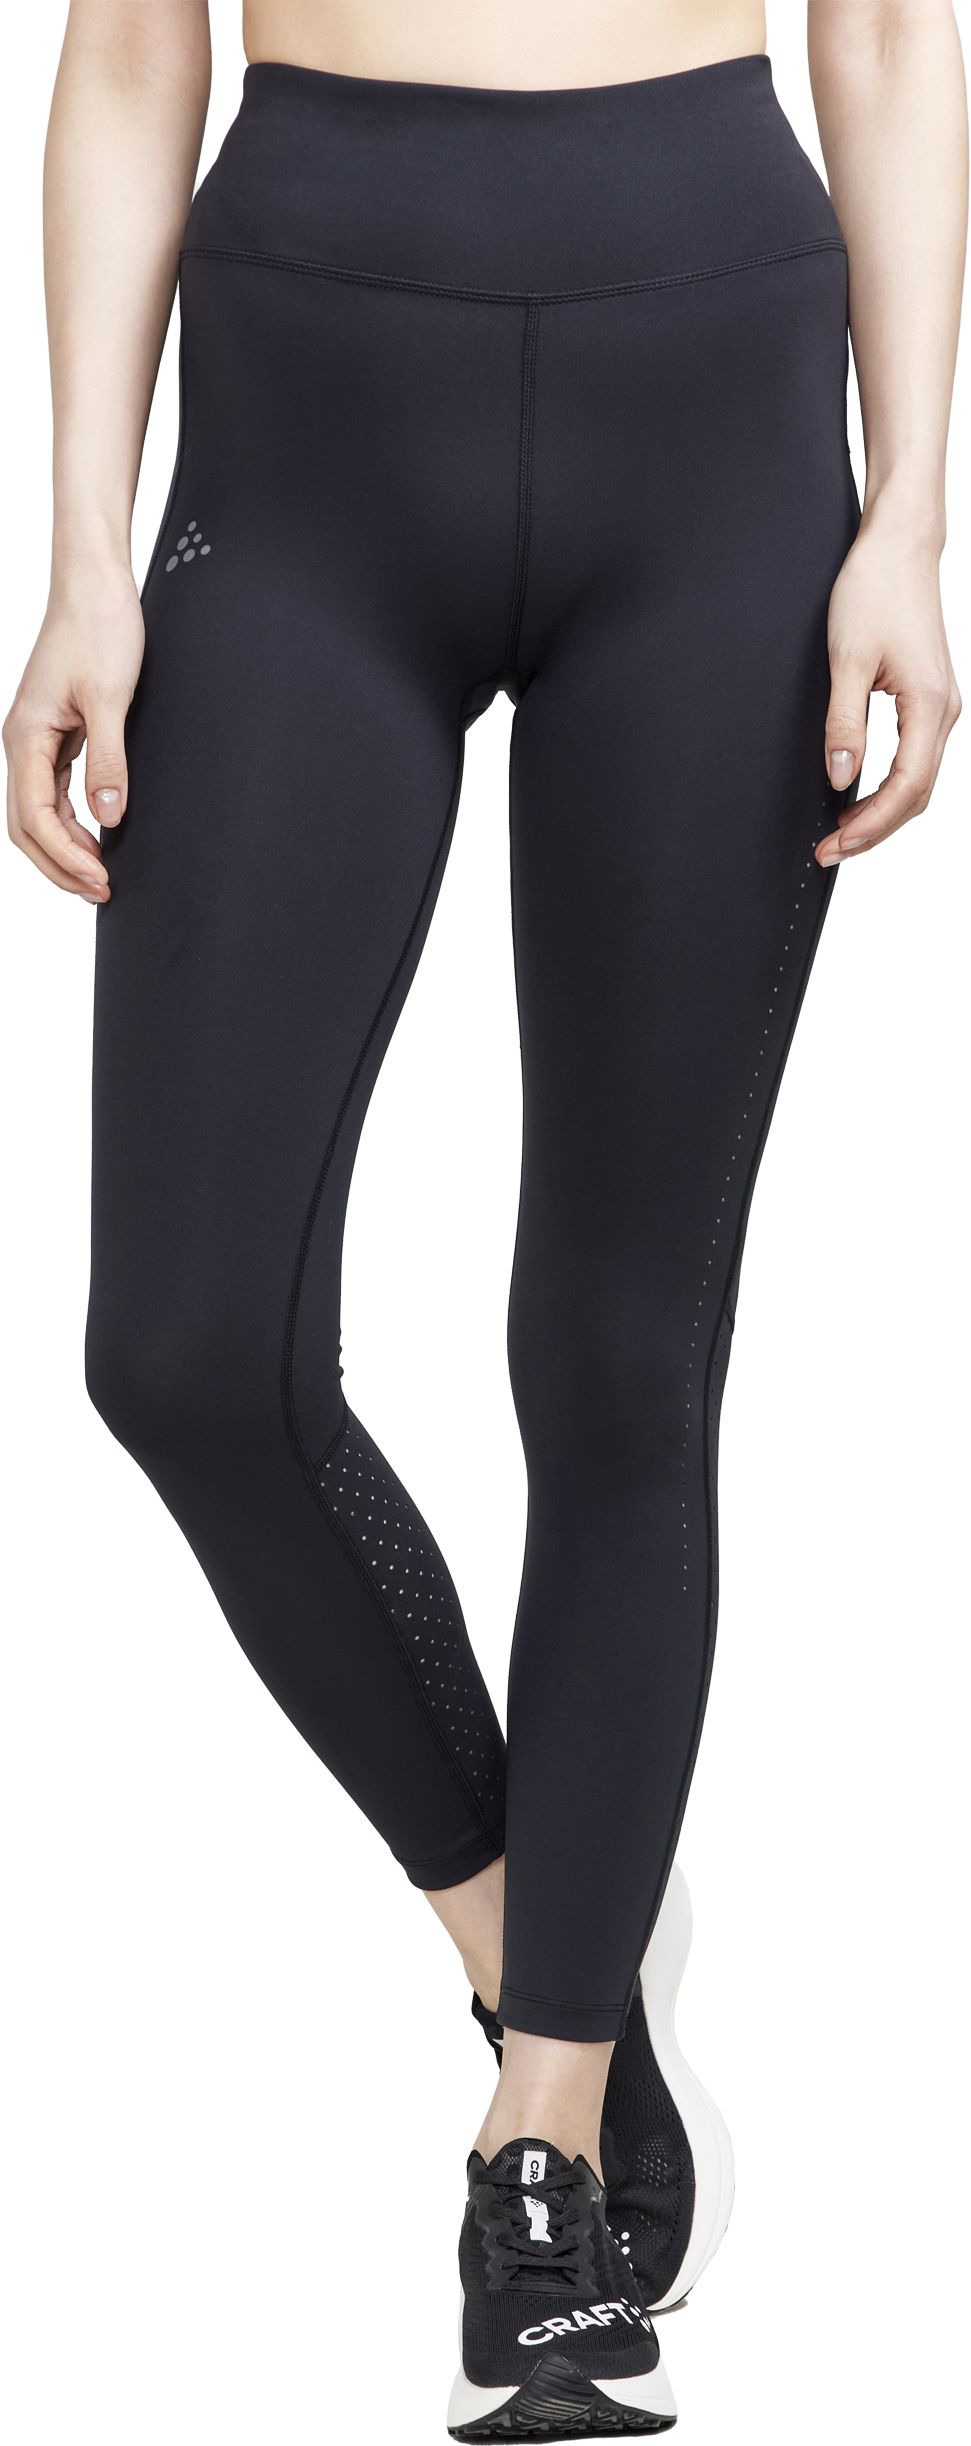 CRAFT, ADV CHARGE PERFORATED TIGHTS W